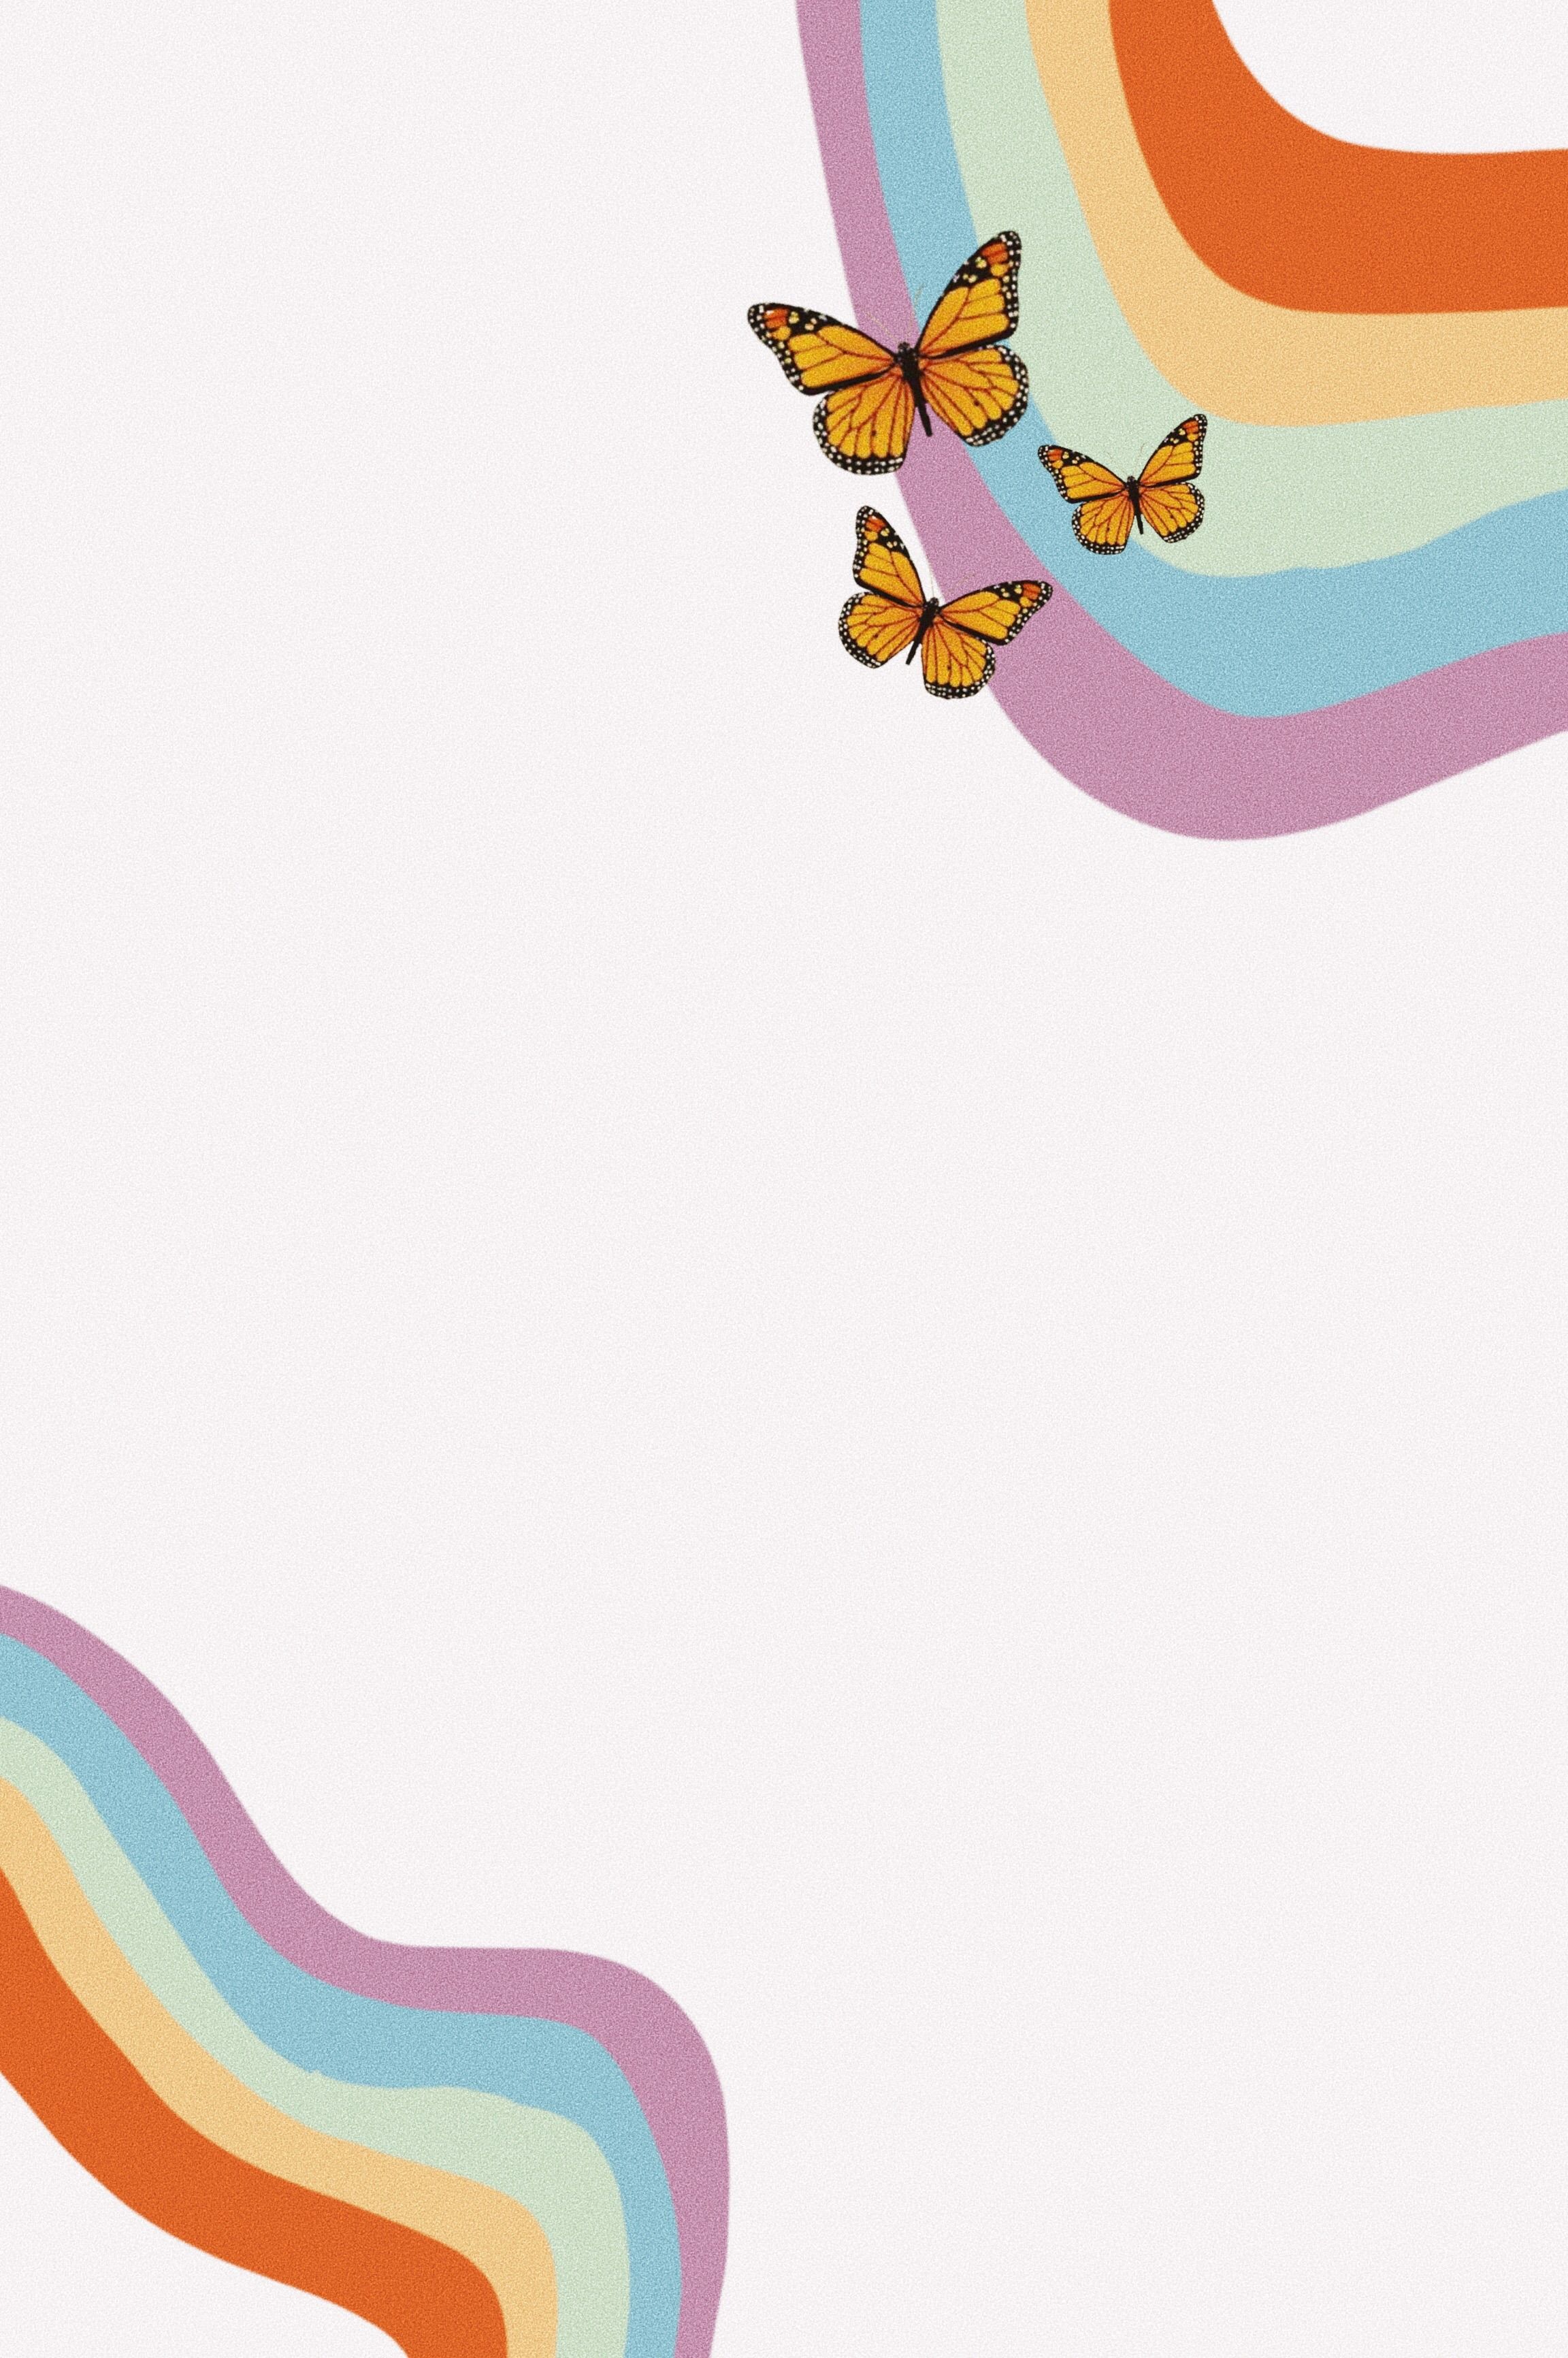 Aesthetic wallpaper with butterflies and rainbow - Heart